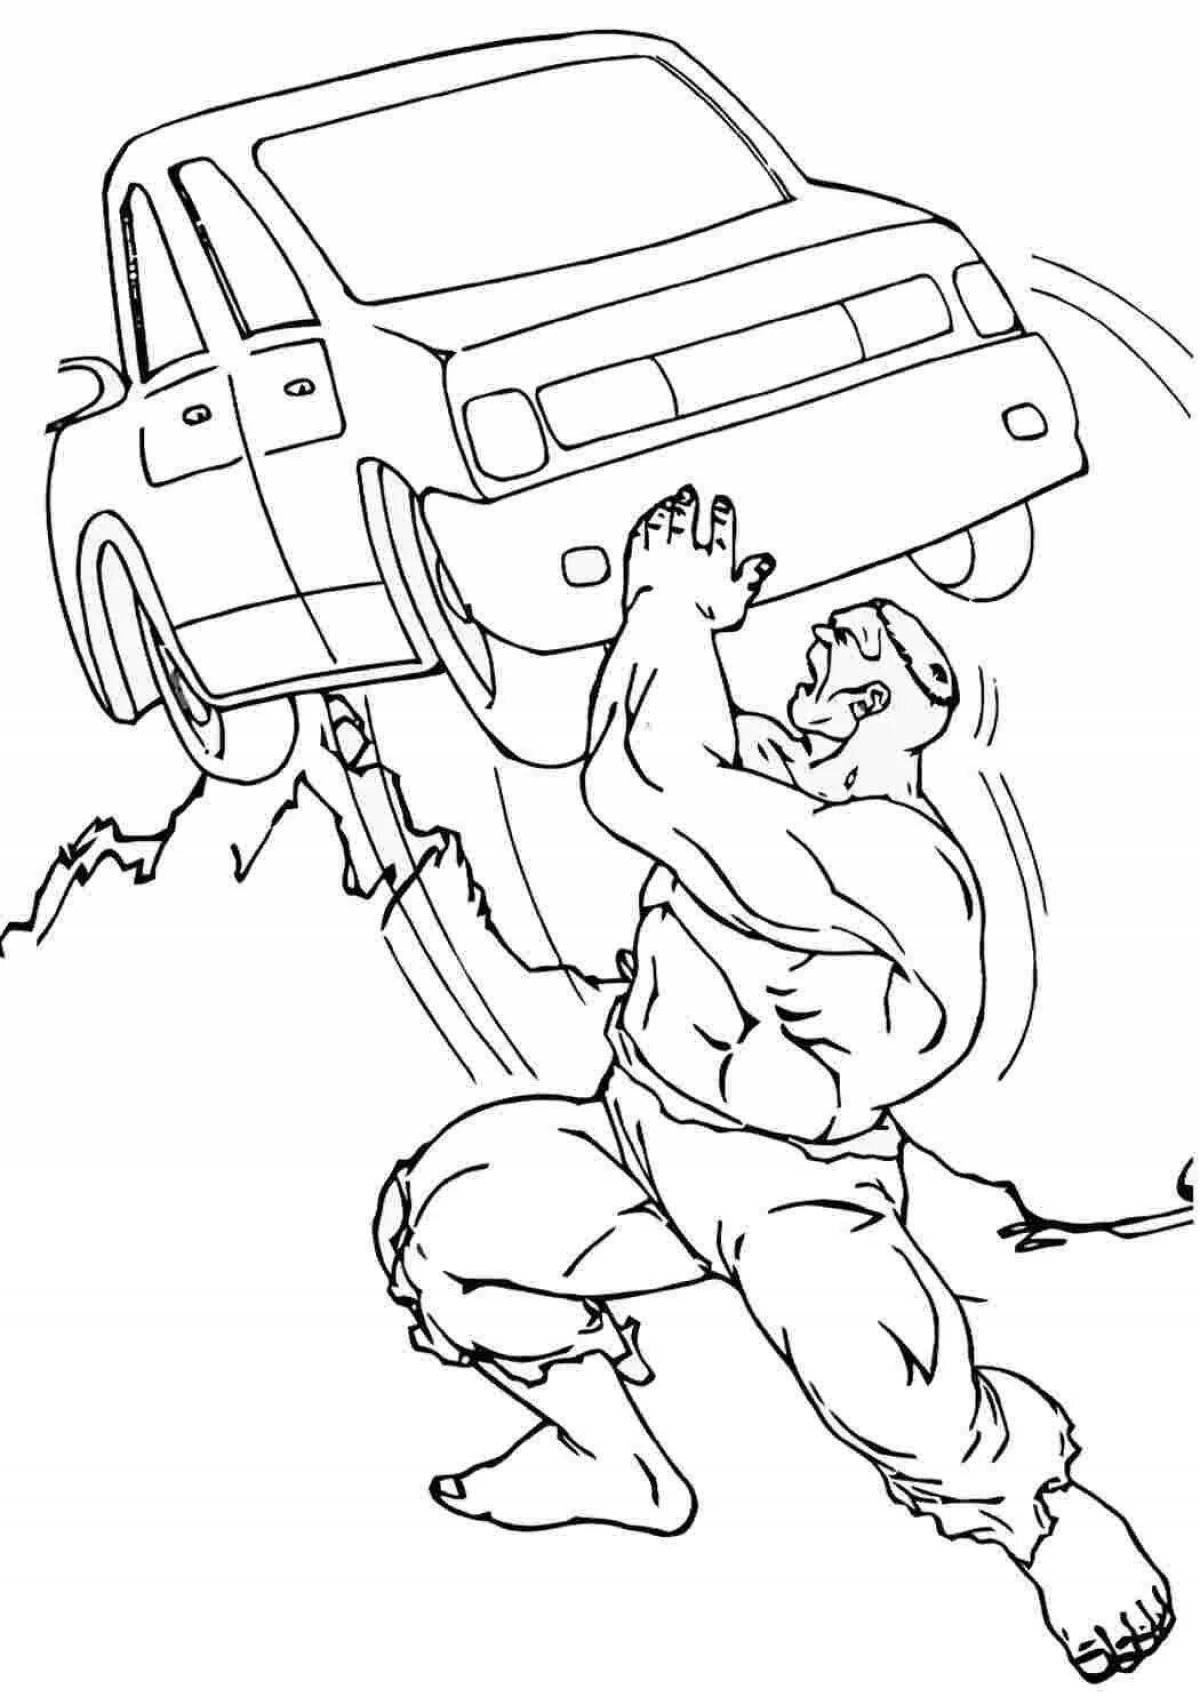 Exquisite wrecked car coloring page